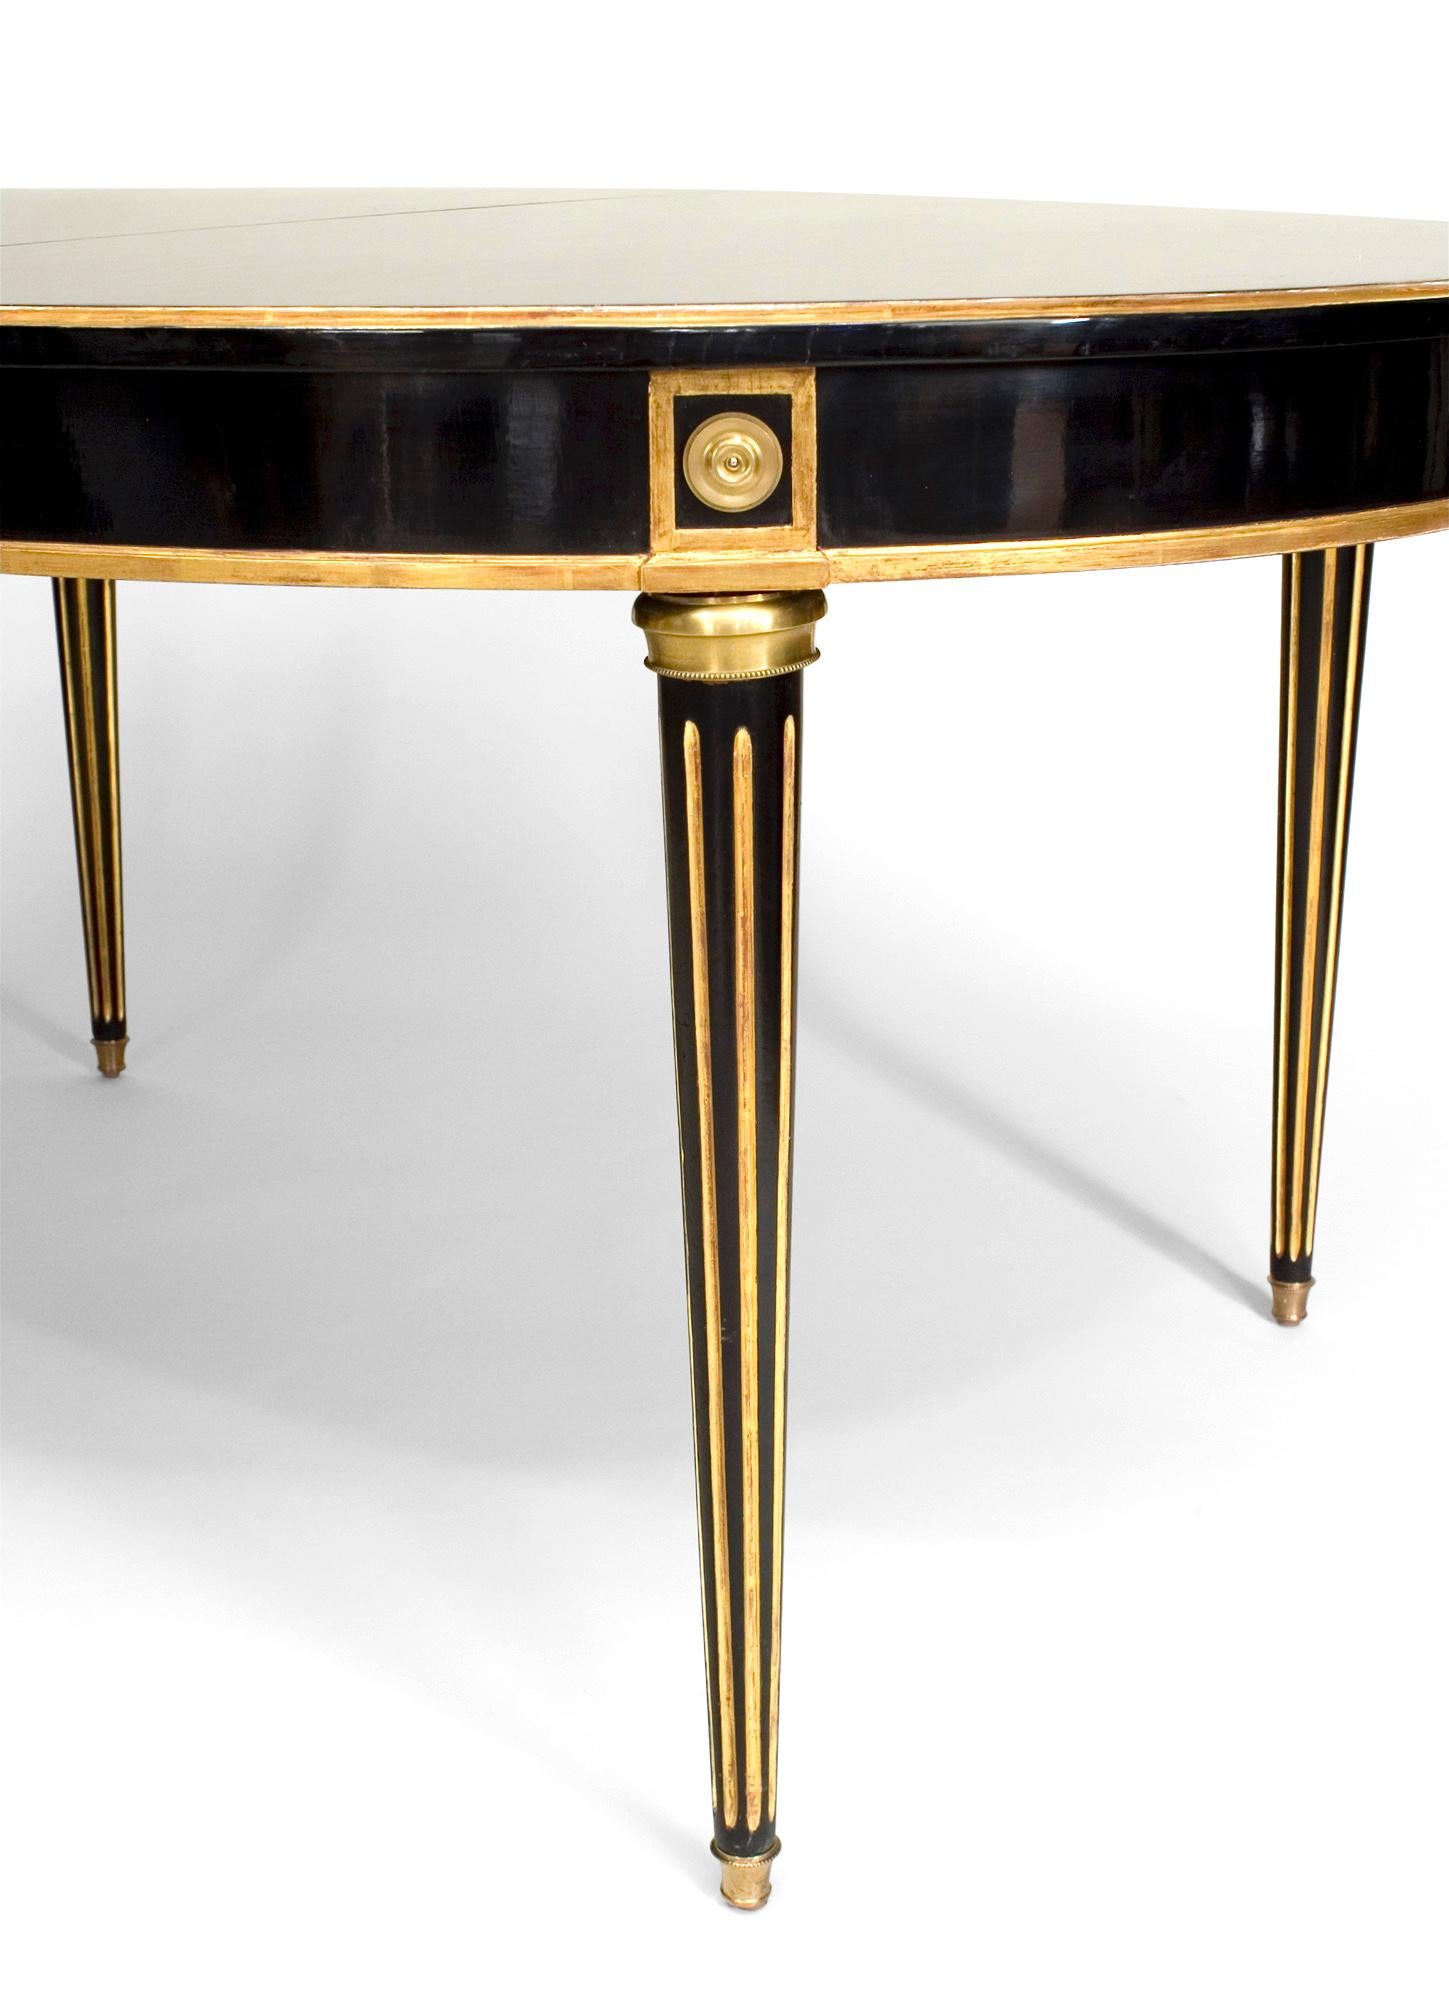 French Louis XVI-style (20th Century) ebonized oval dining table with gilt trim on fluted legs,border and apron with 3 leaves 20